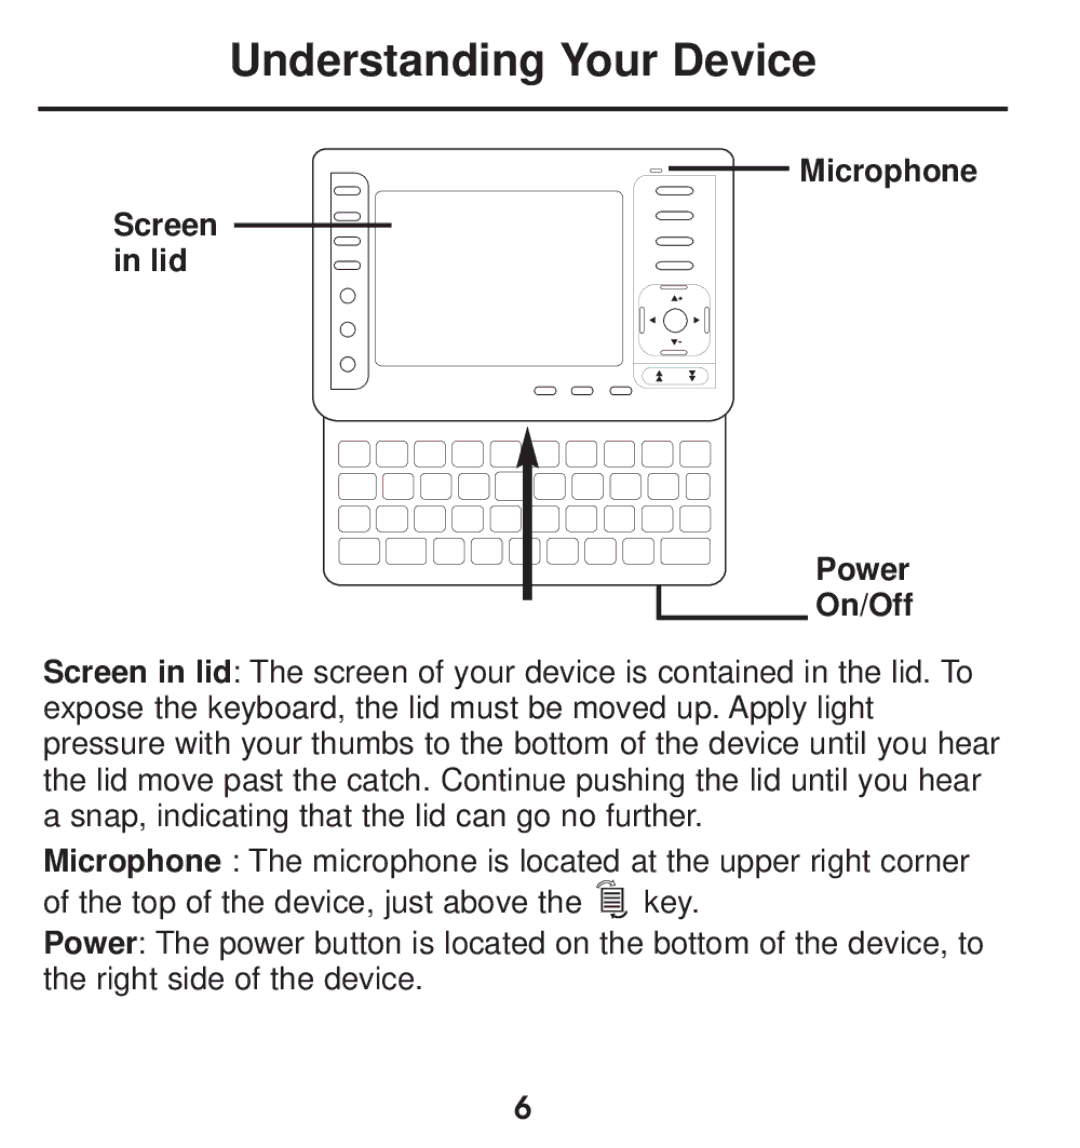 Franklin TGA-490 manual Understanding Your Device, Microphone Screen in lid Power On/Off 